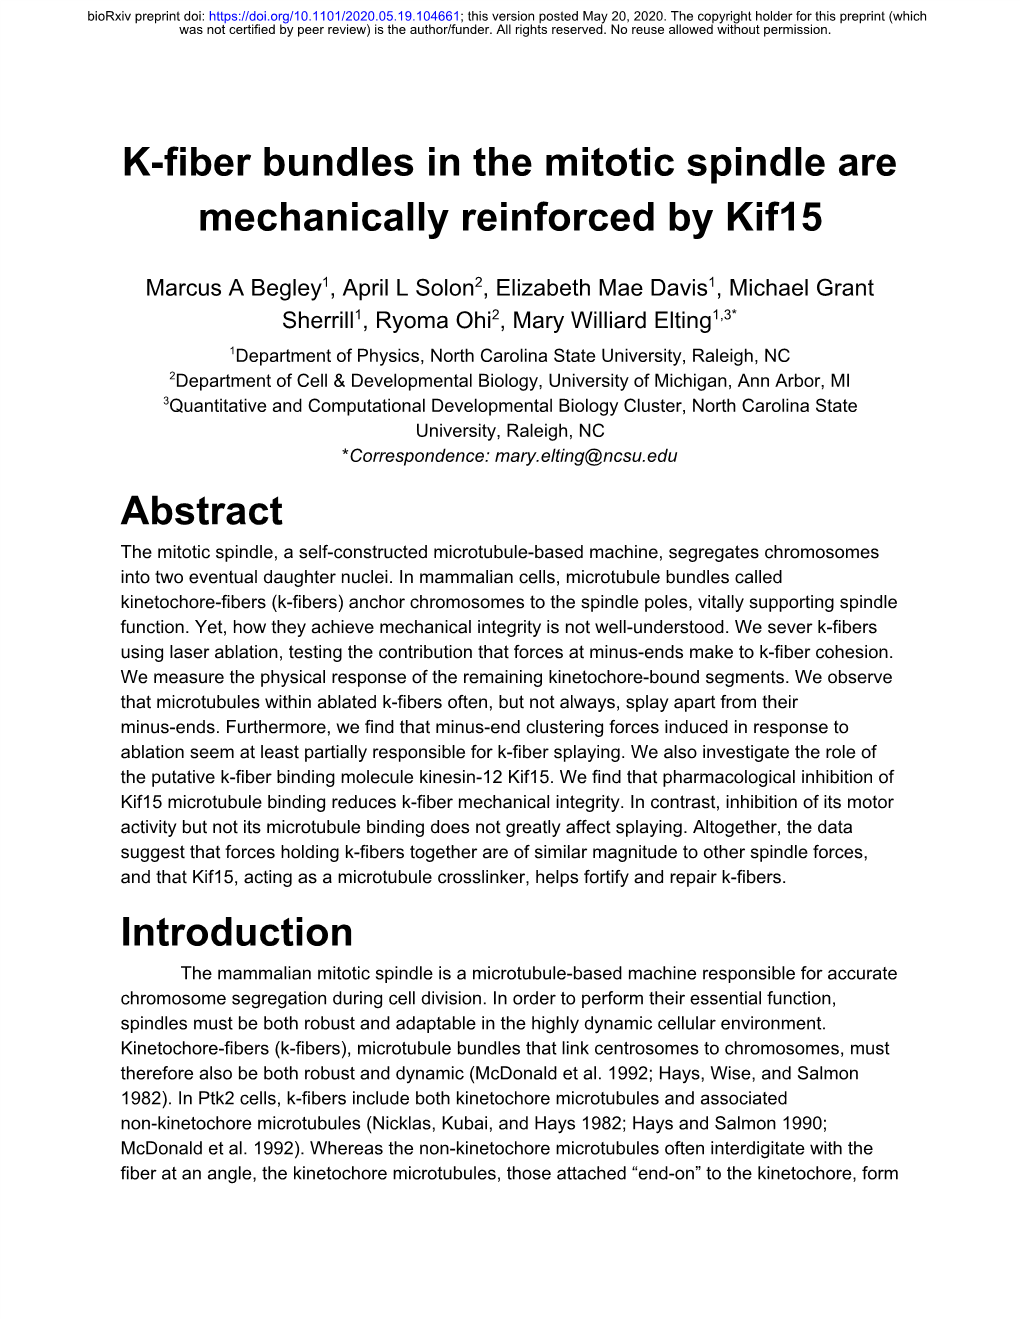 K-Fiber Bundles in the Mitotic Spindle Are Mechanically Reinforced by Kif15